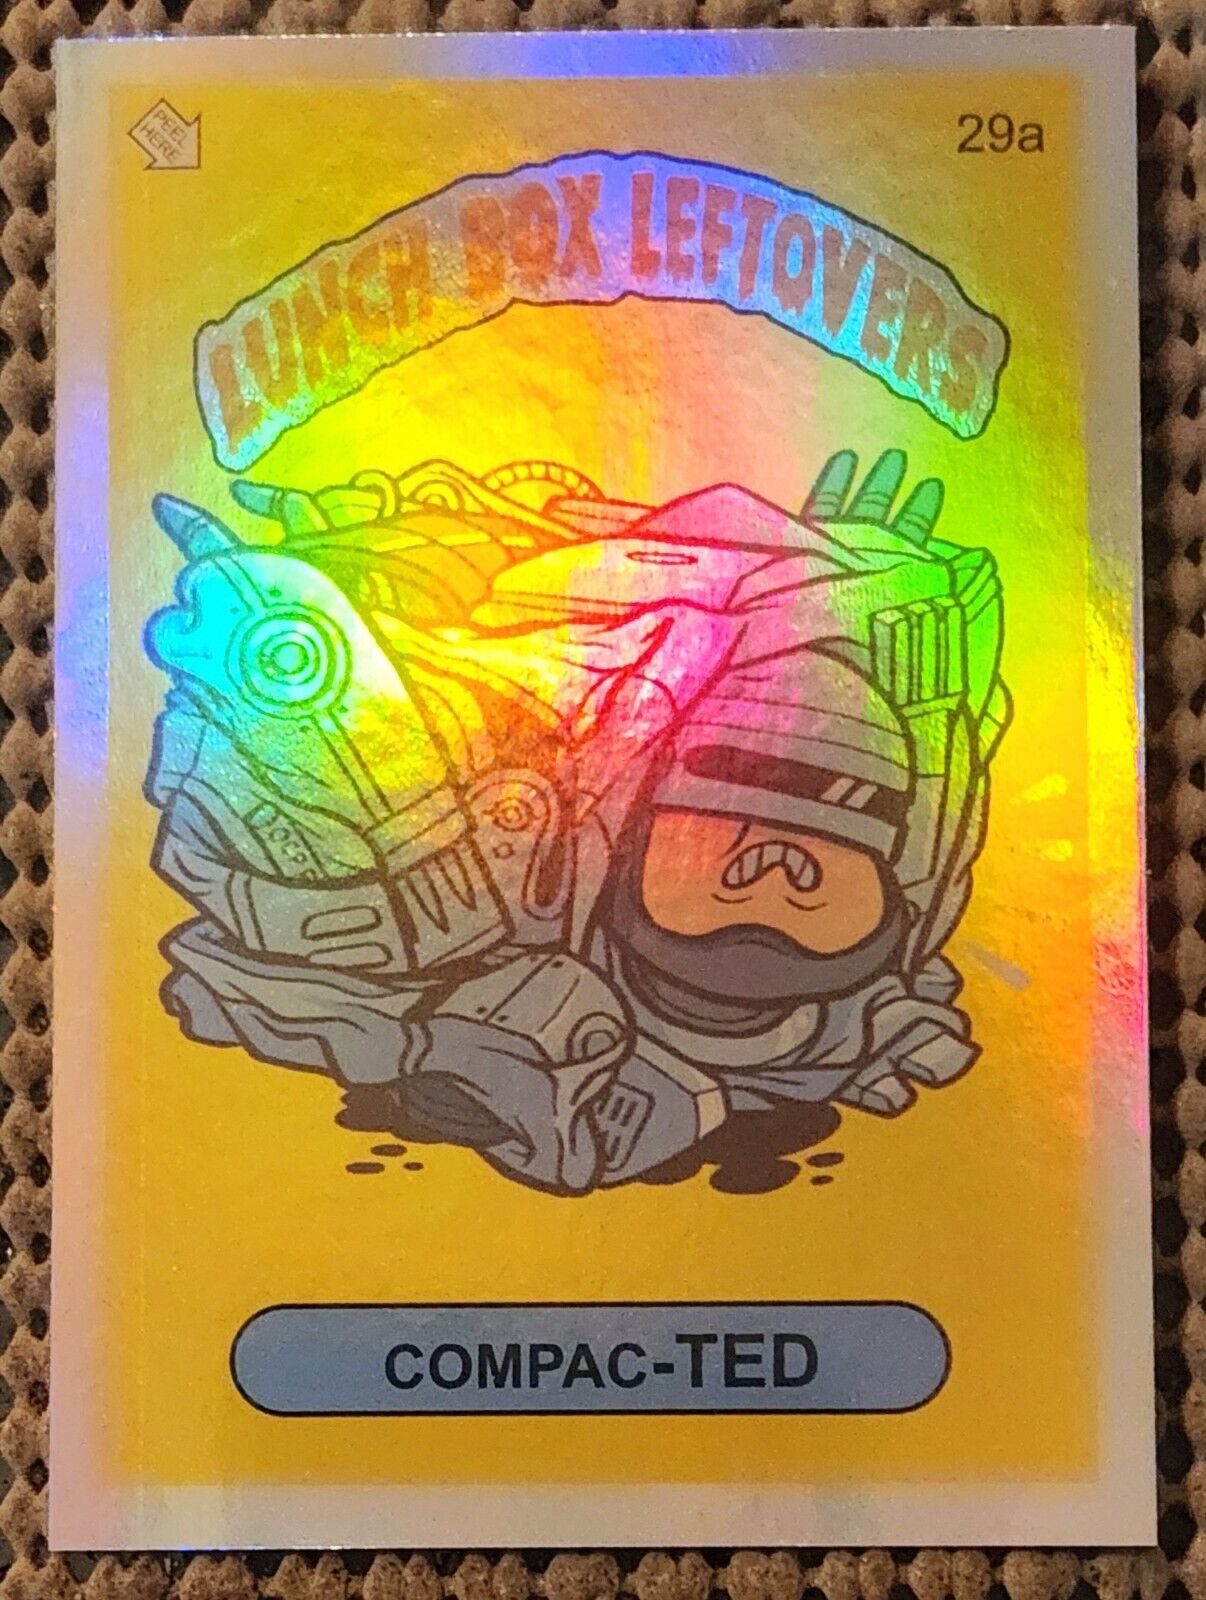 COMPAC-TED 2018 SSFC LUNCH BOX LEFTOVERS RAINBOW FOIL CHASE #29a SP LBLO ROBOCOP